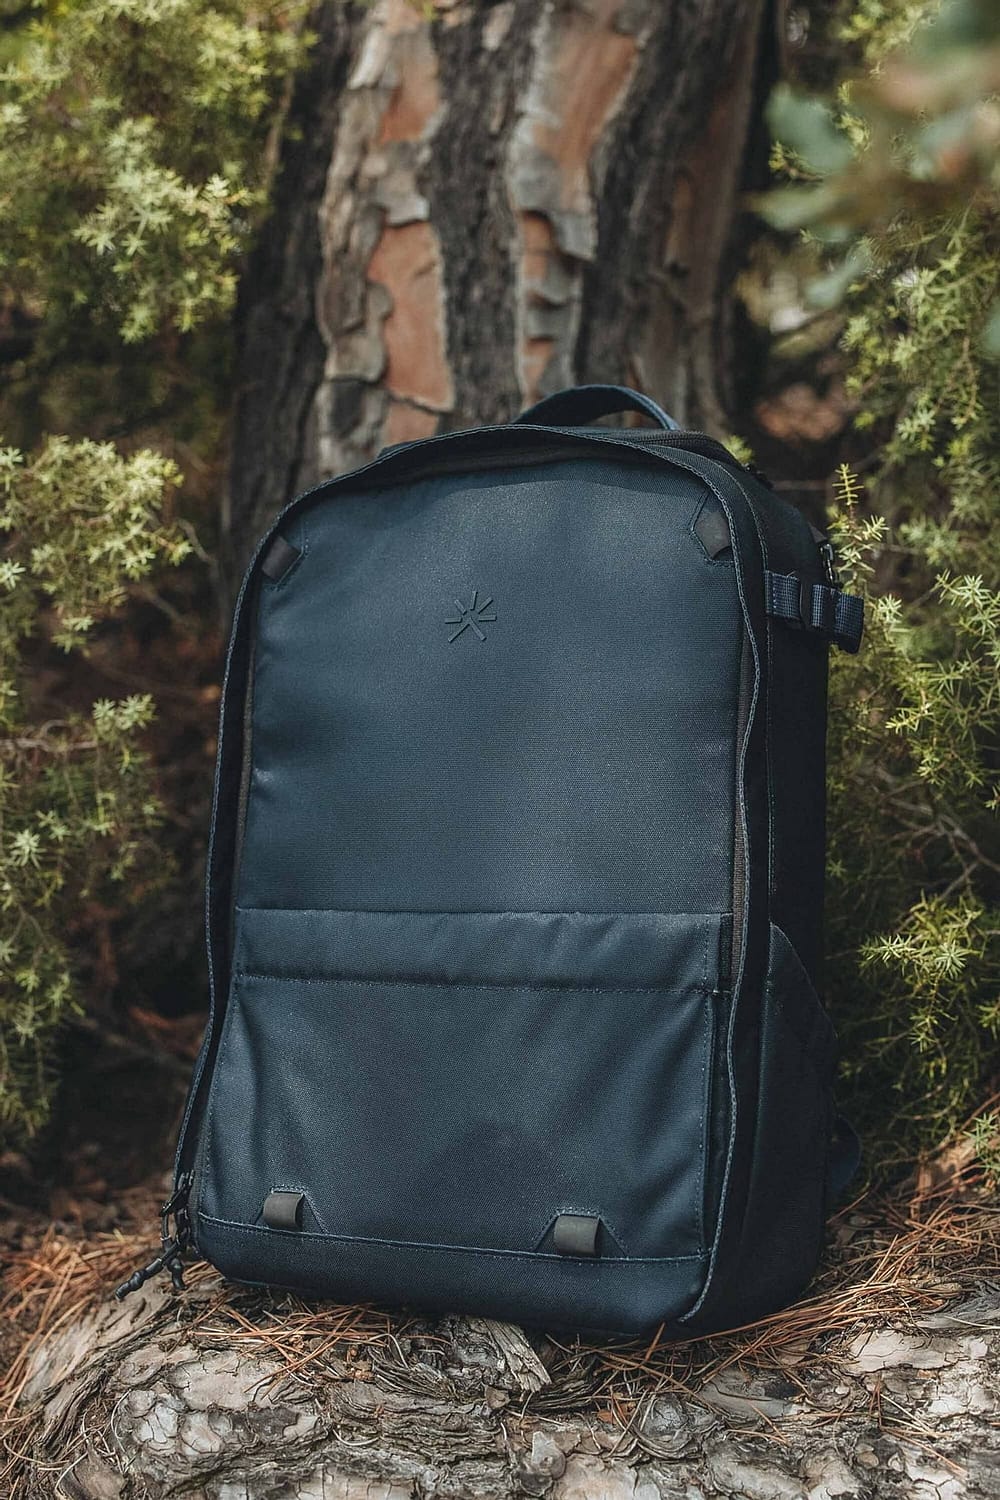 Perfect edc backpack for travel